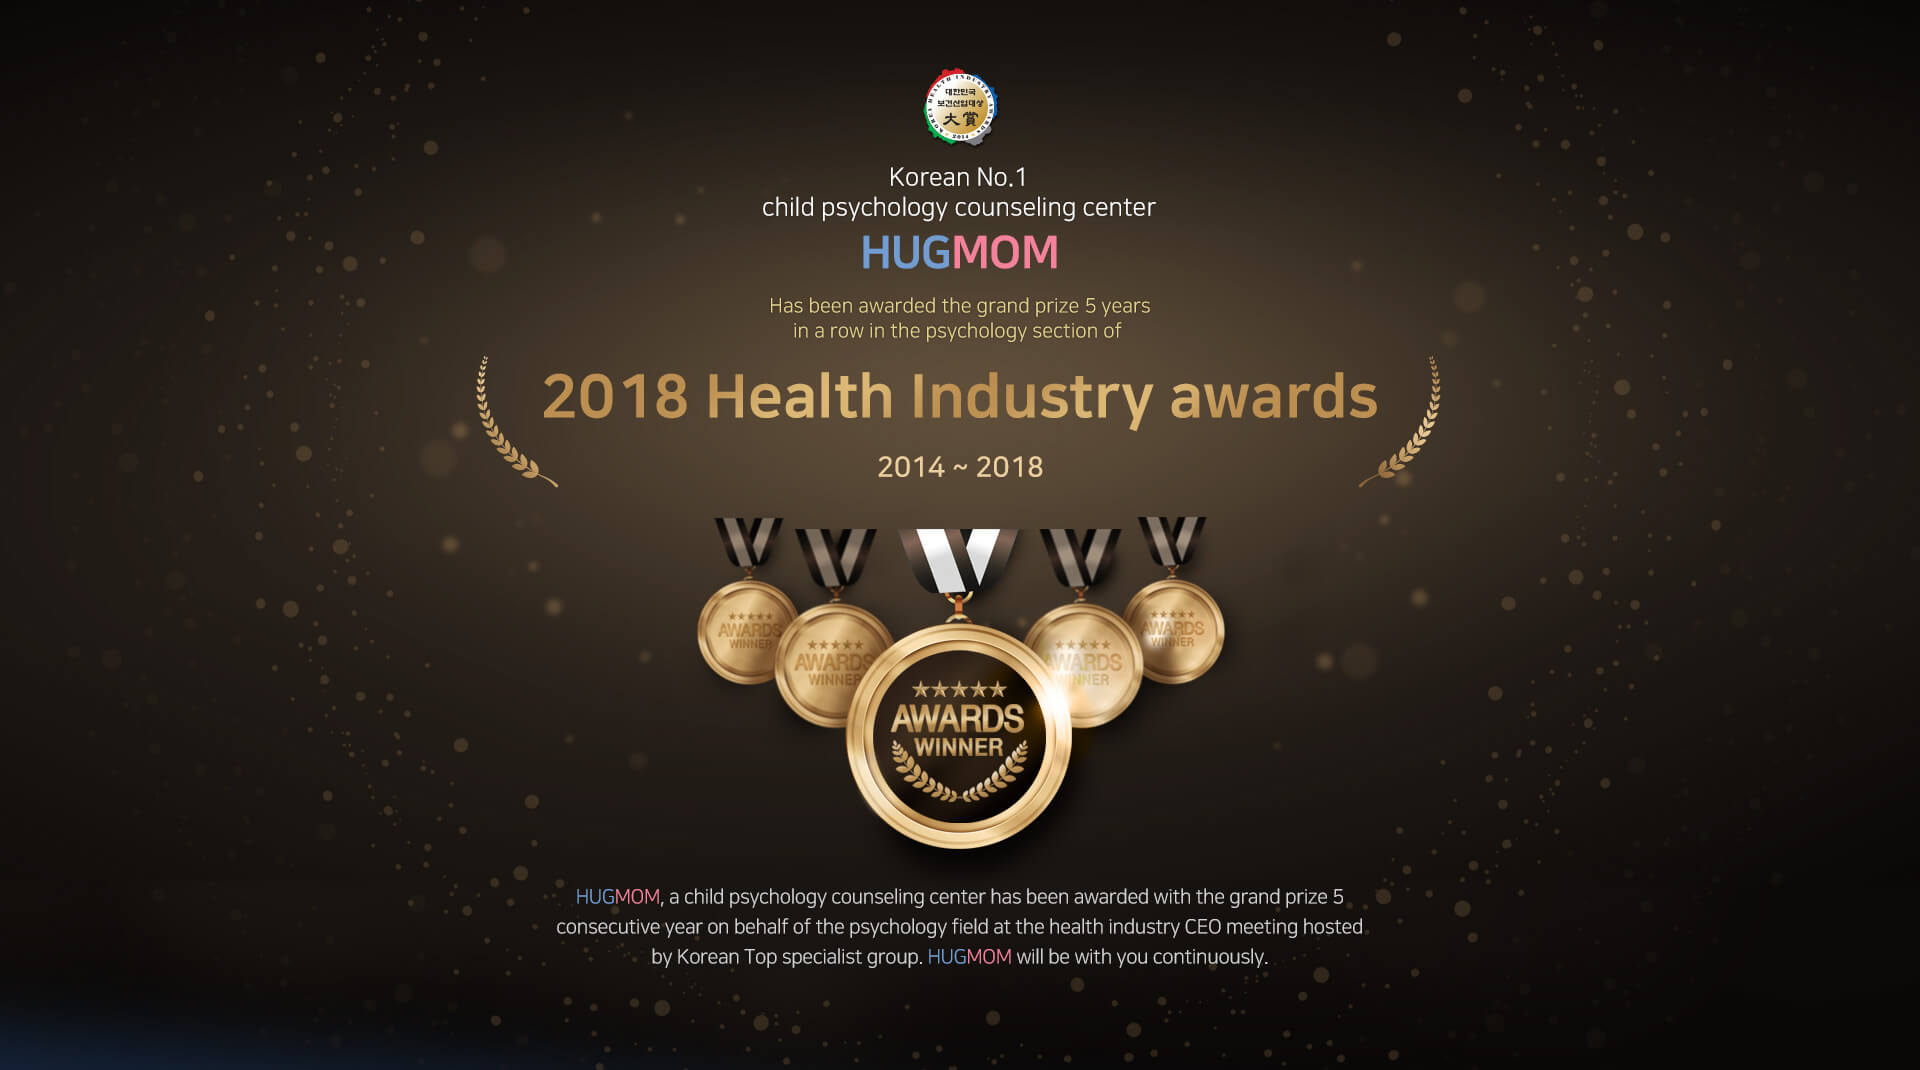 Korean No.1 psychology consultation
				HUGMOM

				Has been awarded the grand prize 5 years
				in a row in the psychology section of 

				2018 Health Industry awards

				2014 ~ 2018

				HUGMOM, a child psychology counseling
				center has been awarded with the grand prize 5
				consecutive year on behalf of the psychology field
				at the health industry CEO meeting hosted
				by Korean Top specialist group.
				HUGMOM will be with you continuously.